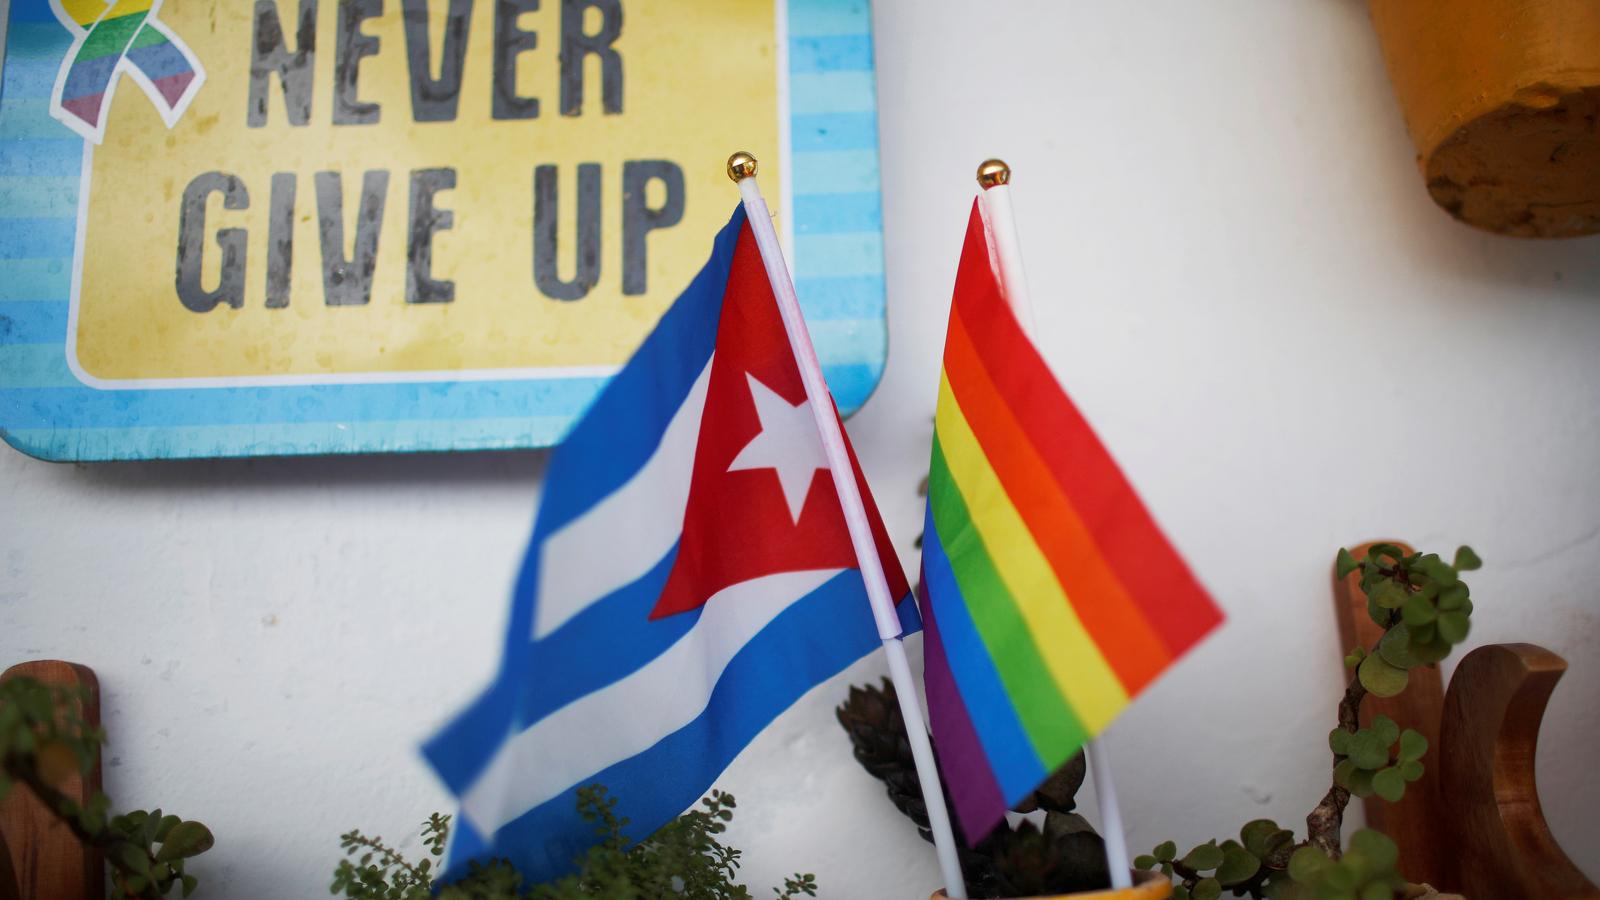 A Cuba flag and a Pride rainbow flag in a cup with nearby sign "Never Give Up." 